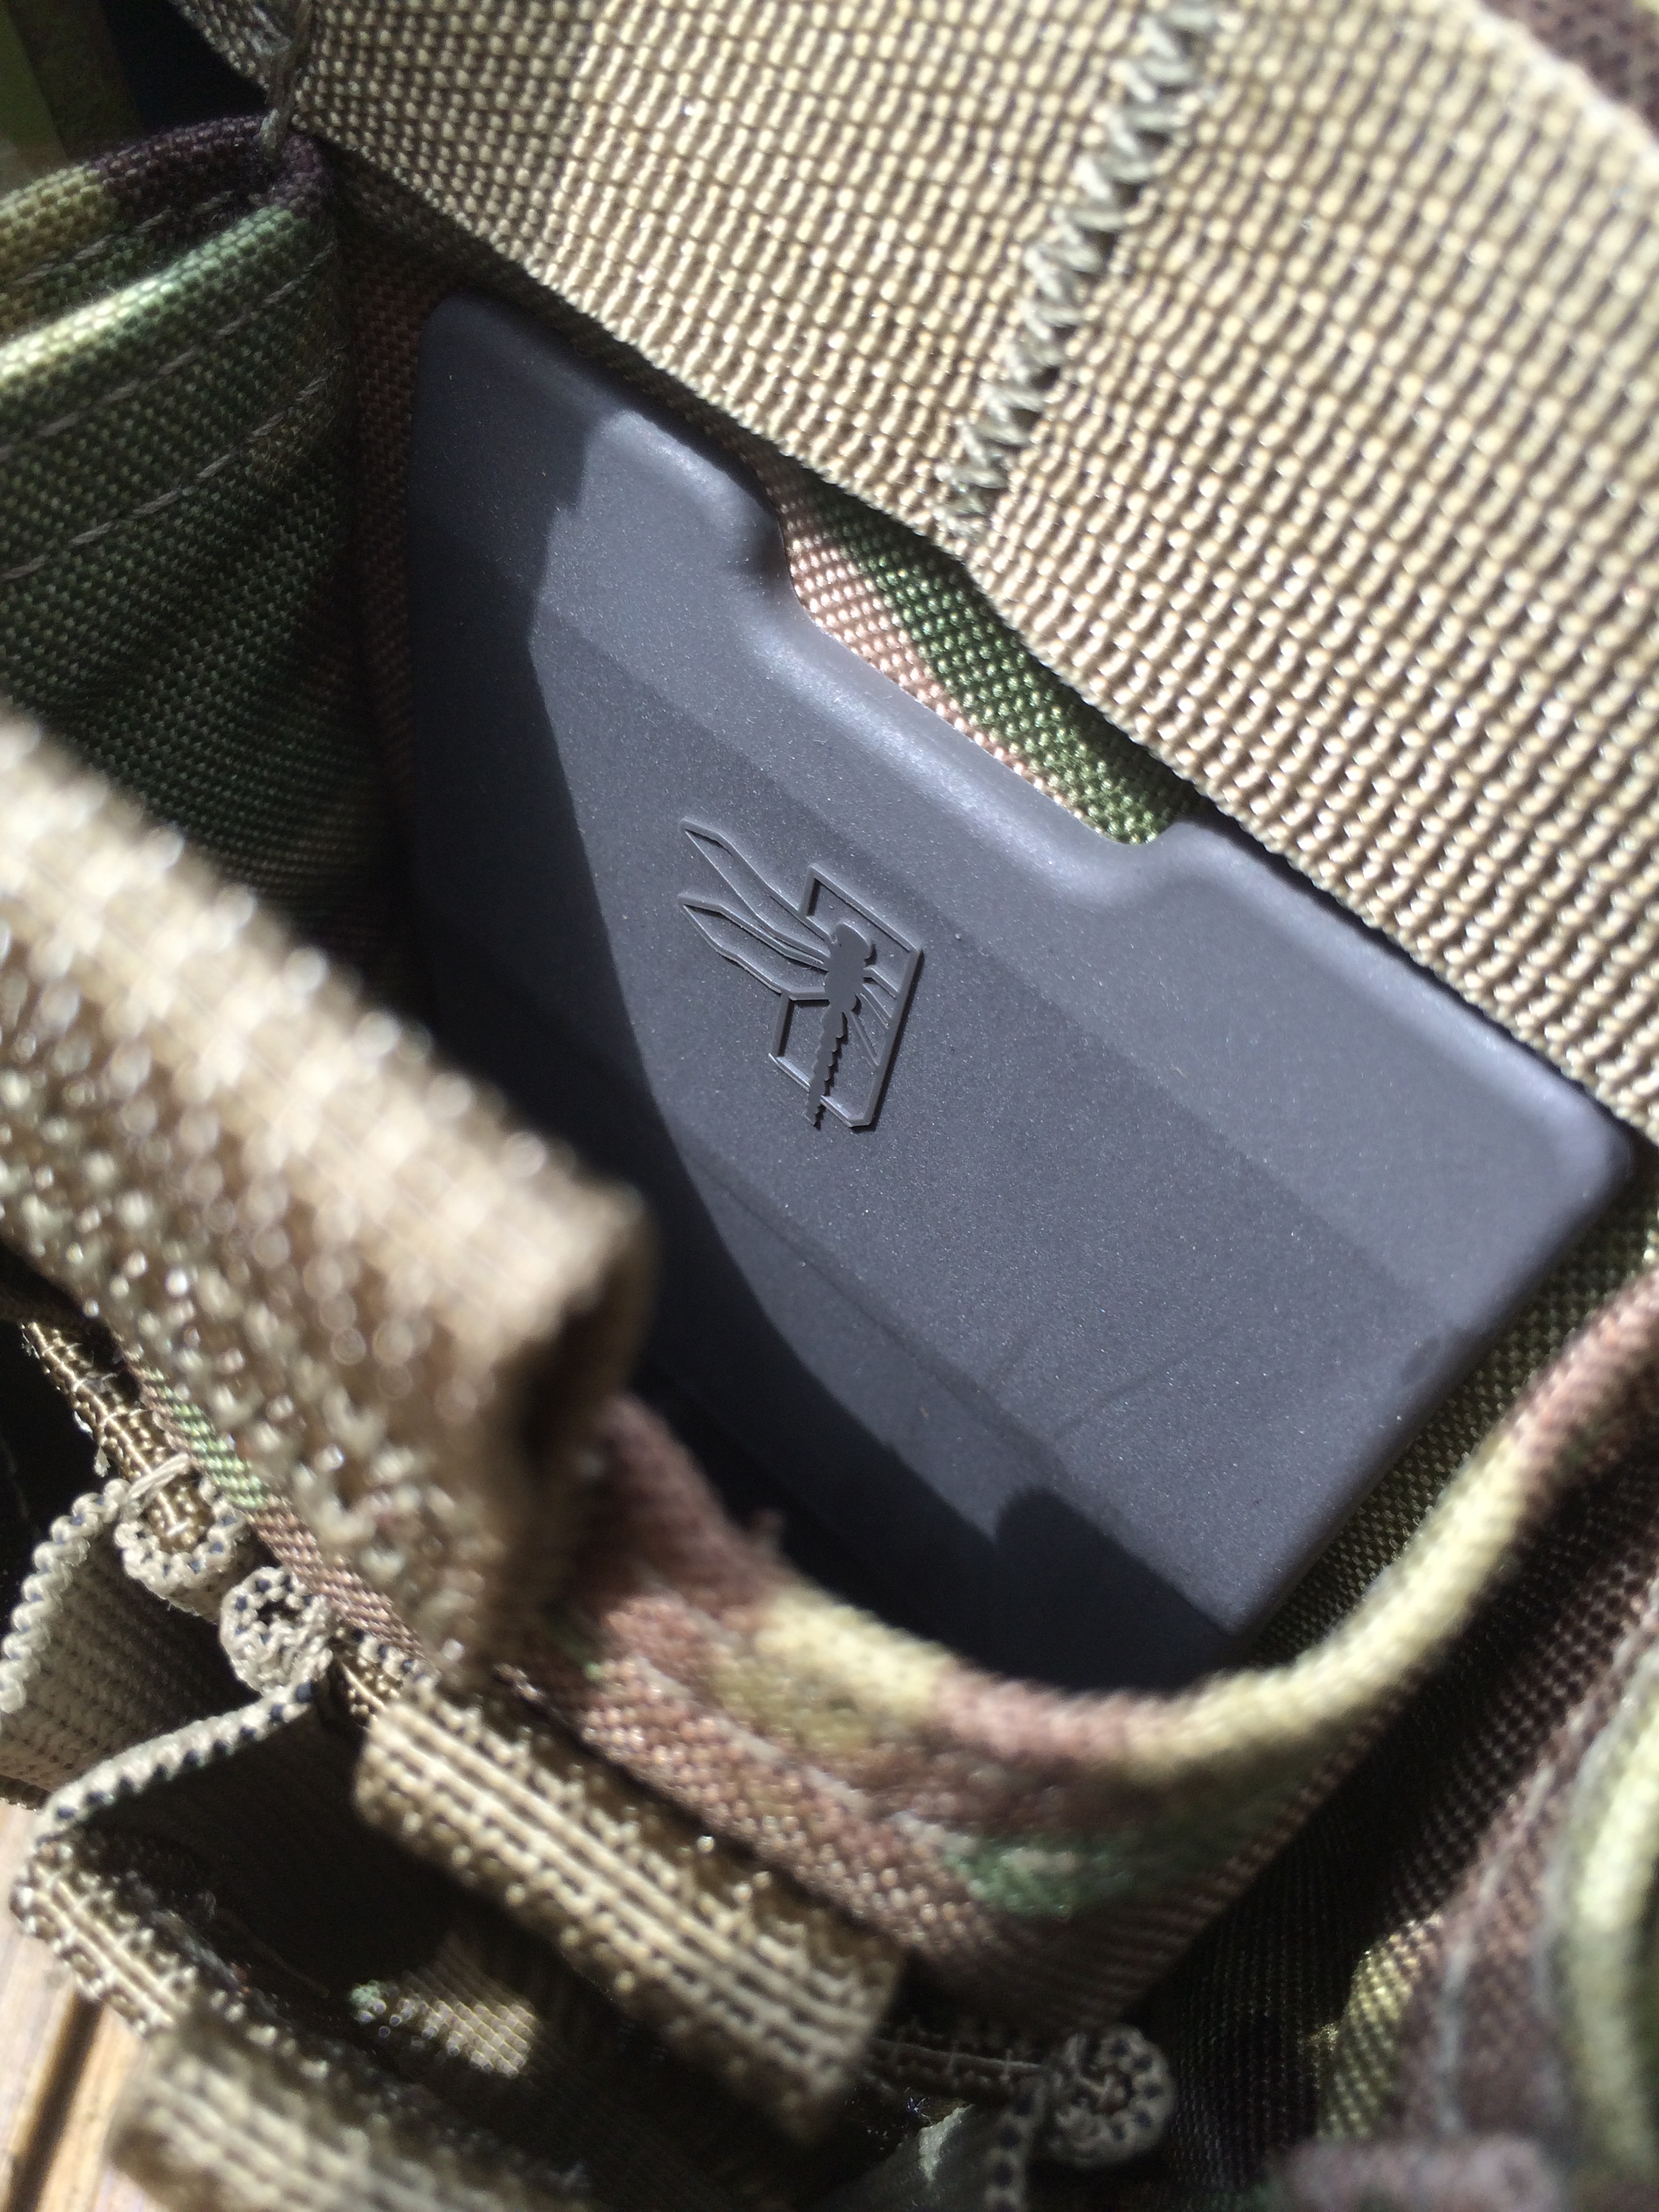 REVIEW: Haley Strategic D3CR Disruptive Environments Chest Rig and 